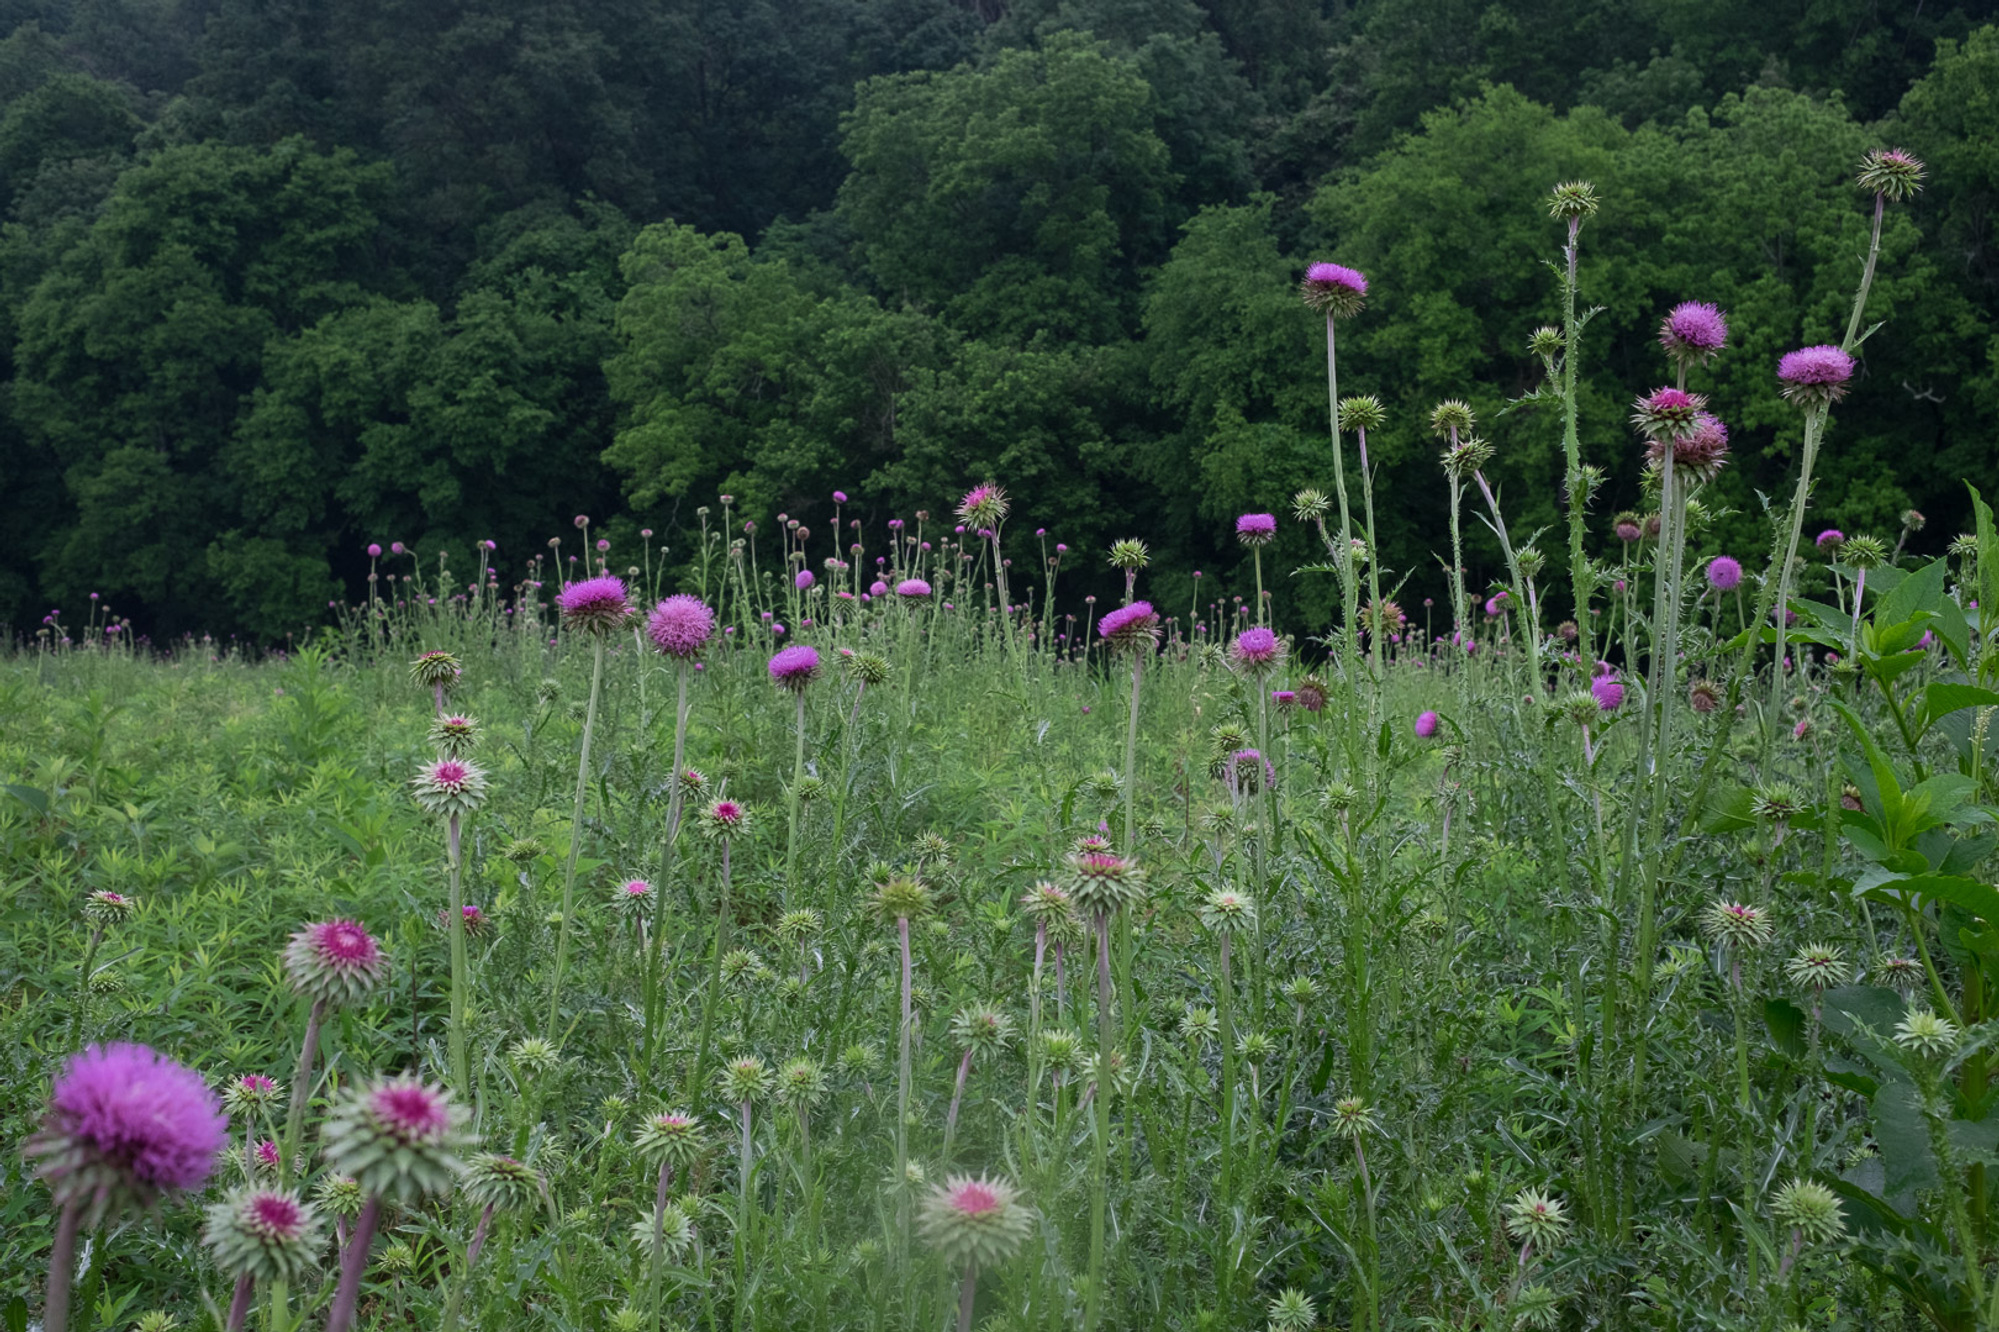 Tennessee Thistles
Balance, Harmony, and Complexity
Landscape photography


--
Amber McDonald